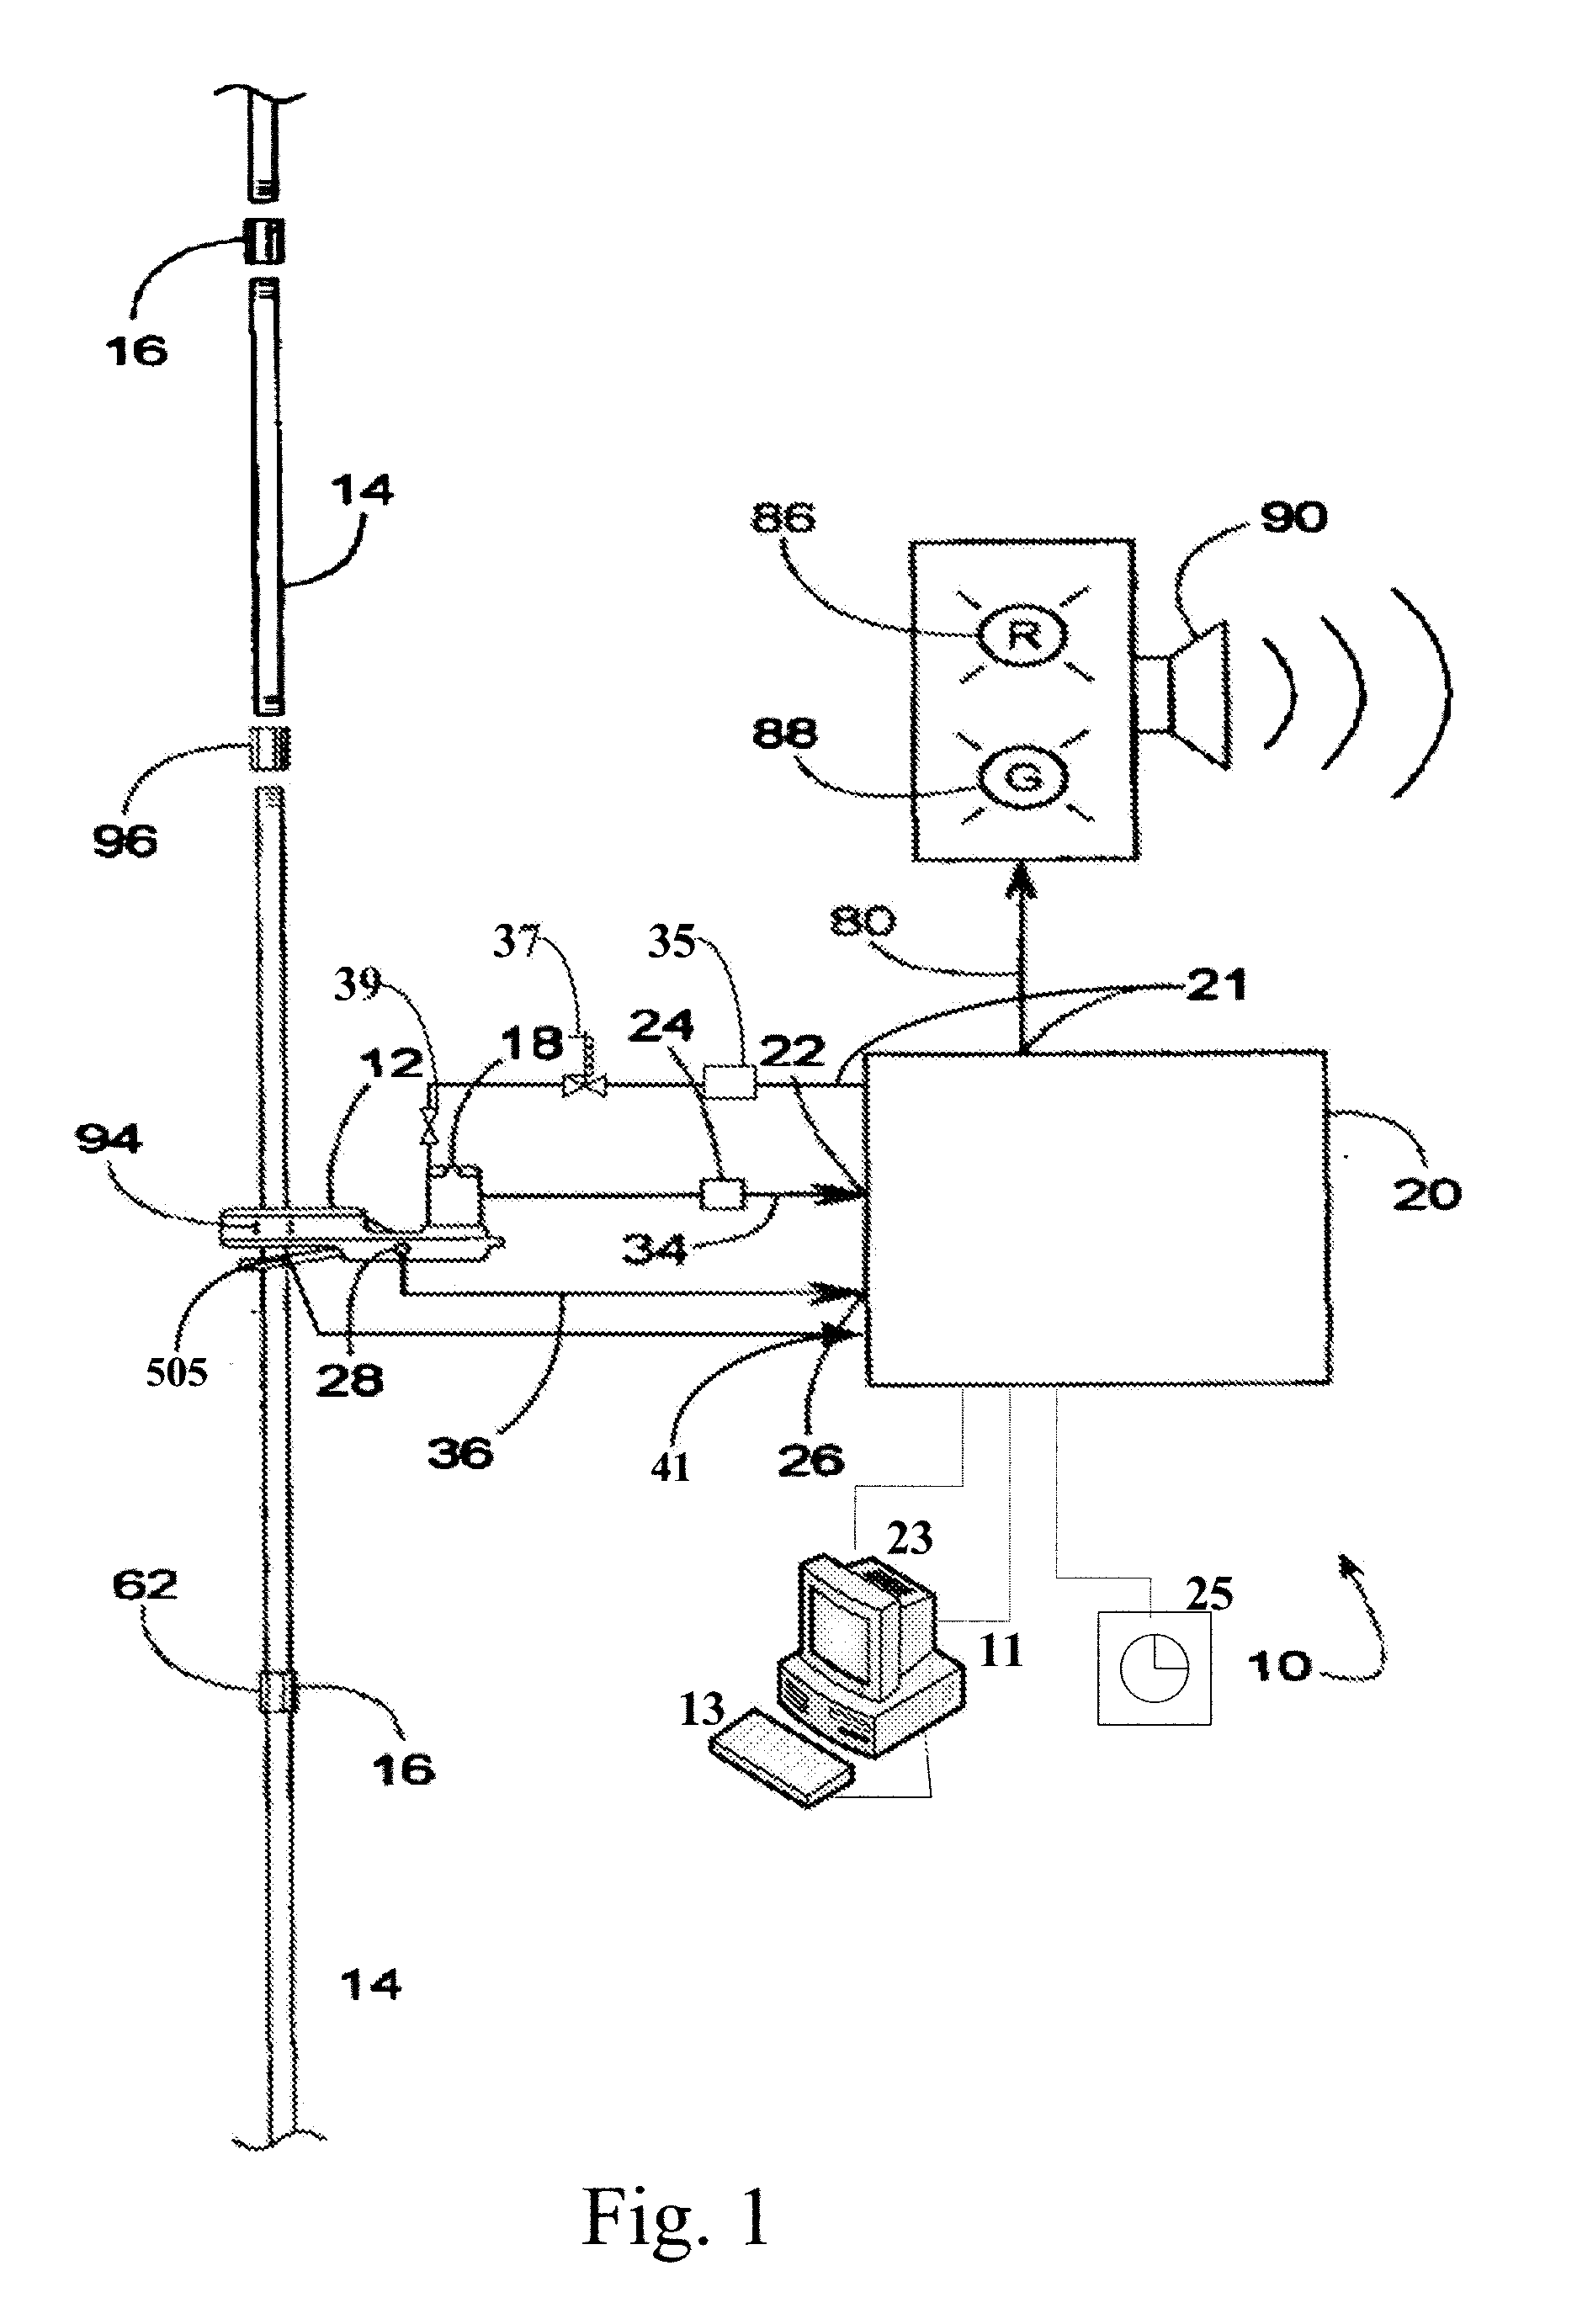 Method and System for Controlling Tongs Make-Up Speed and Evaluating and Controlling Torque at the Tongs